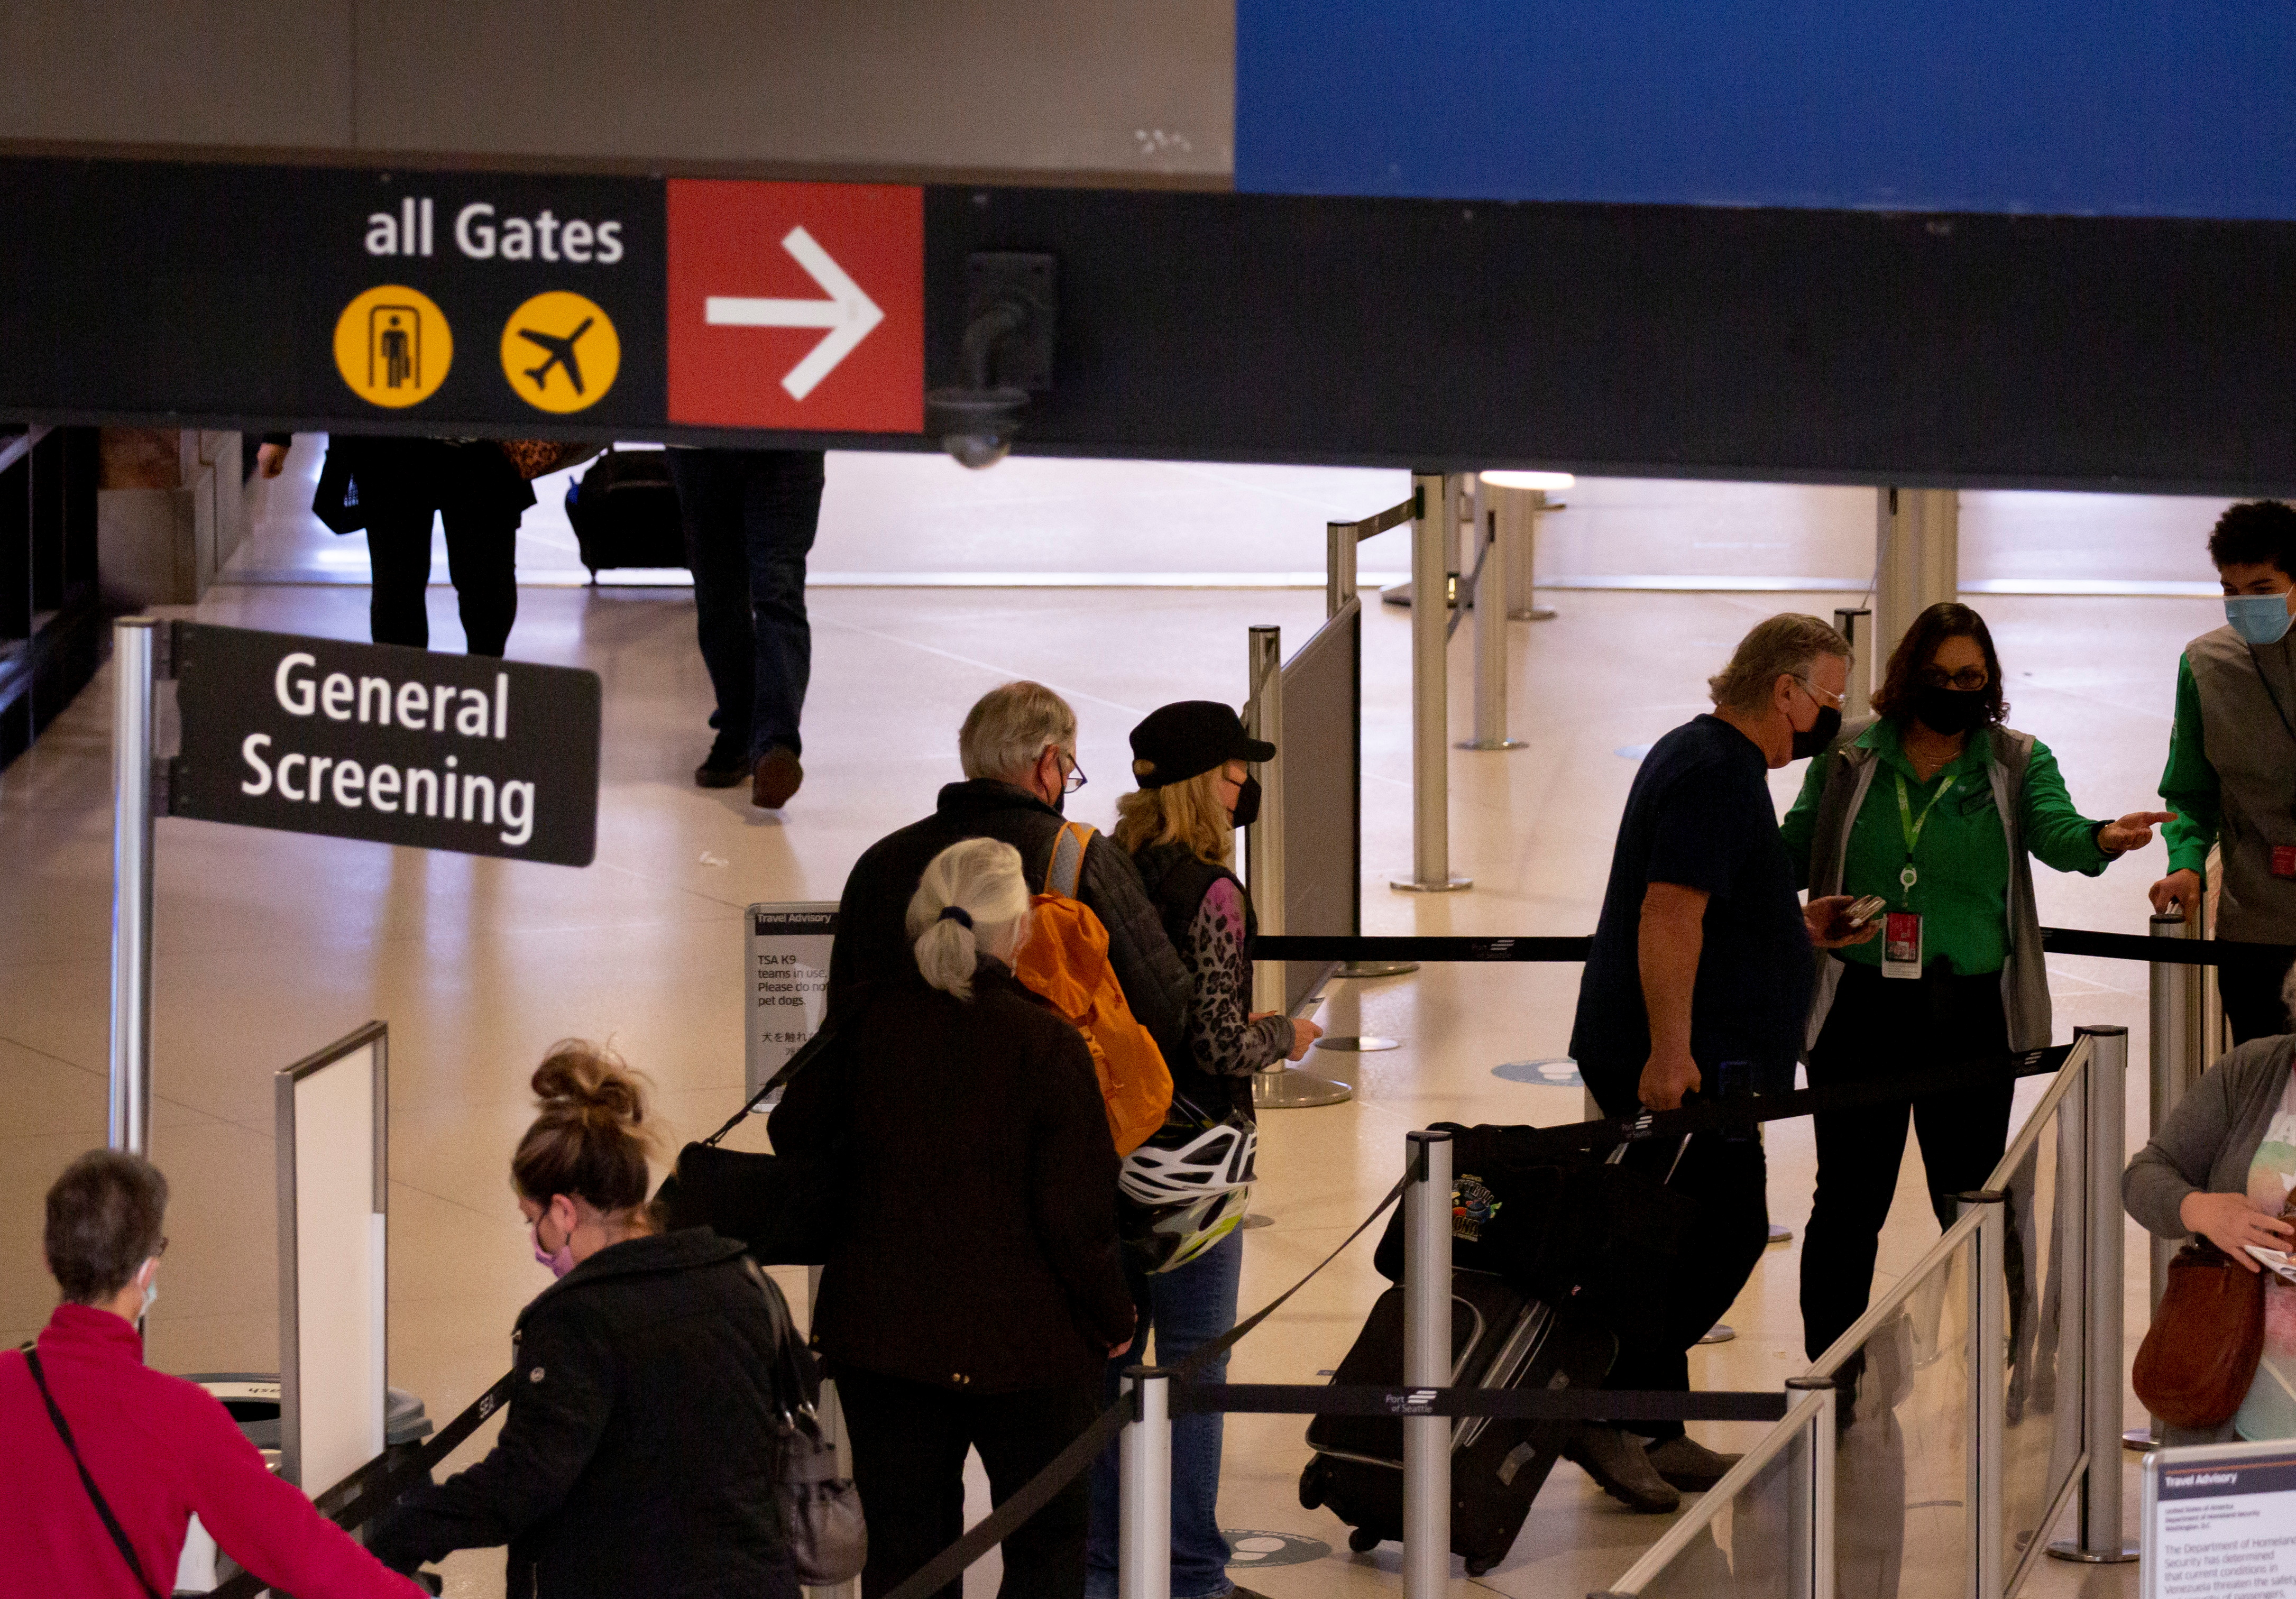 More Canadian families are likely to begin travelling as restrictions are relaxed.